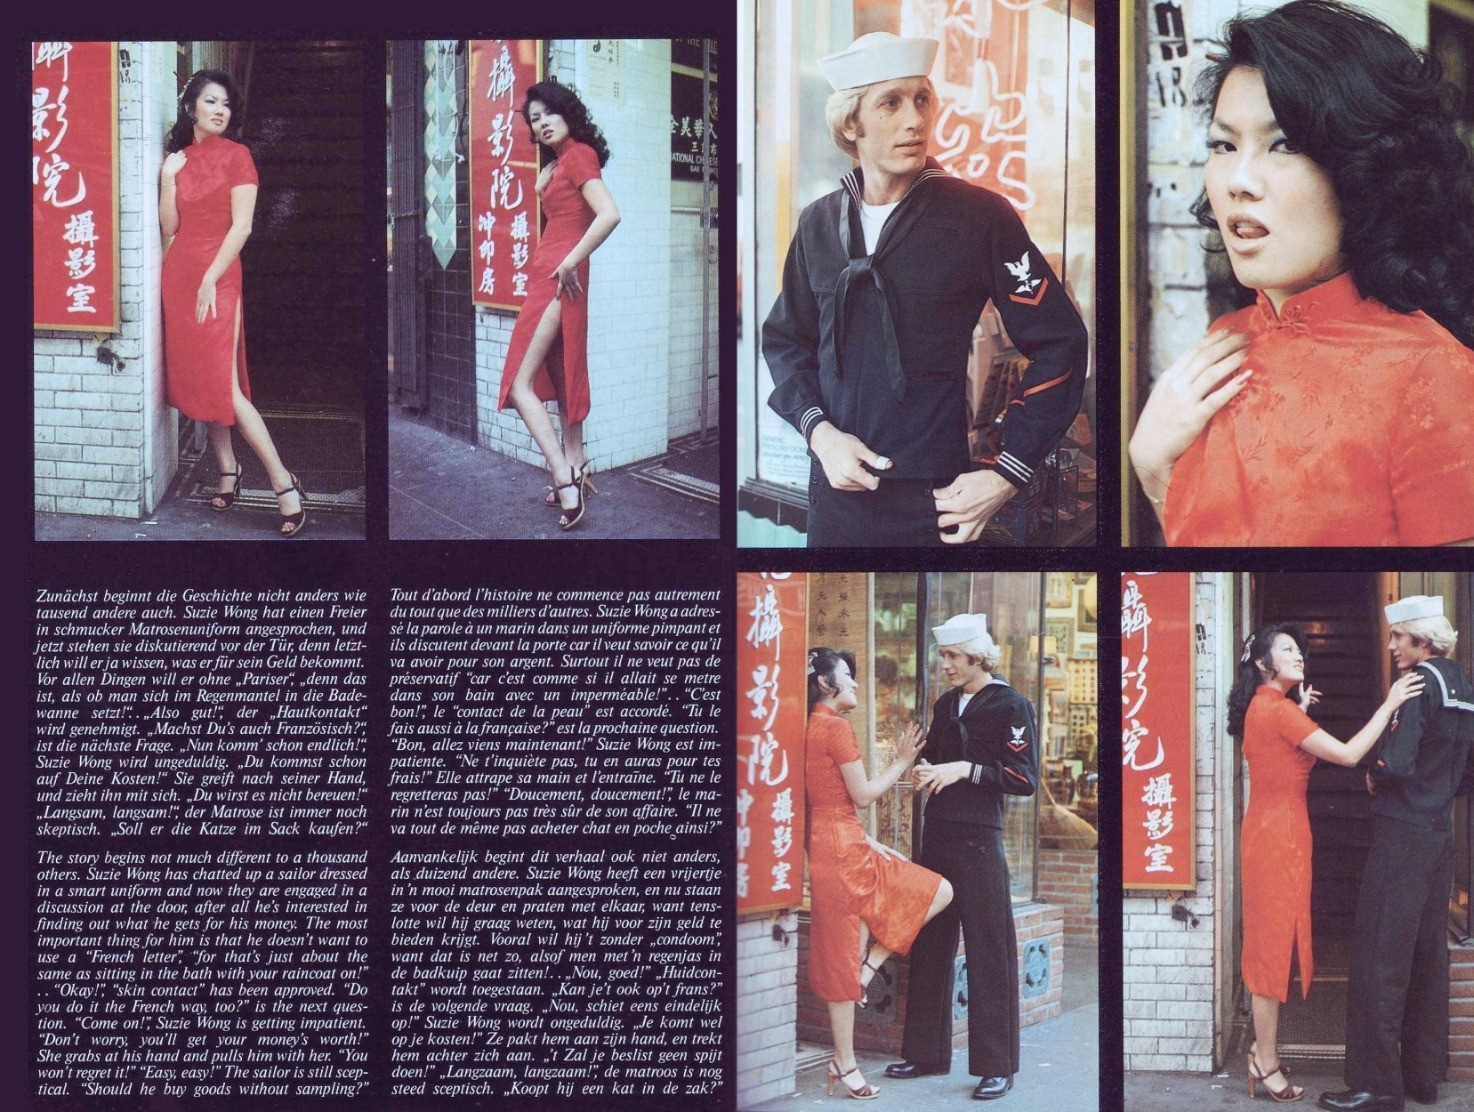 Attached: 3 images Suzie Wong all dressed up. 